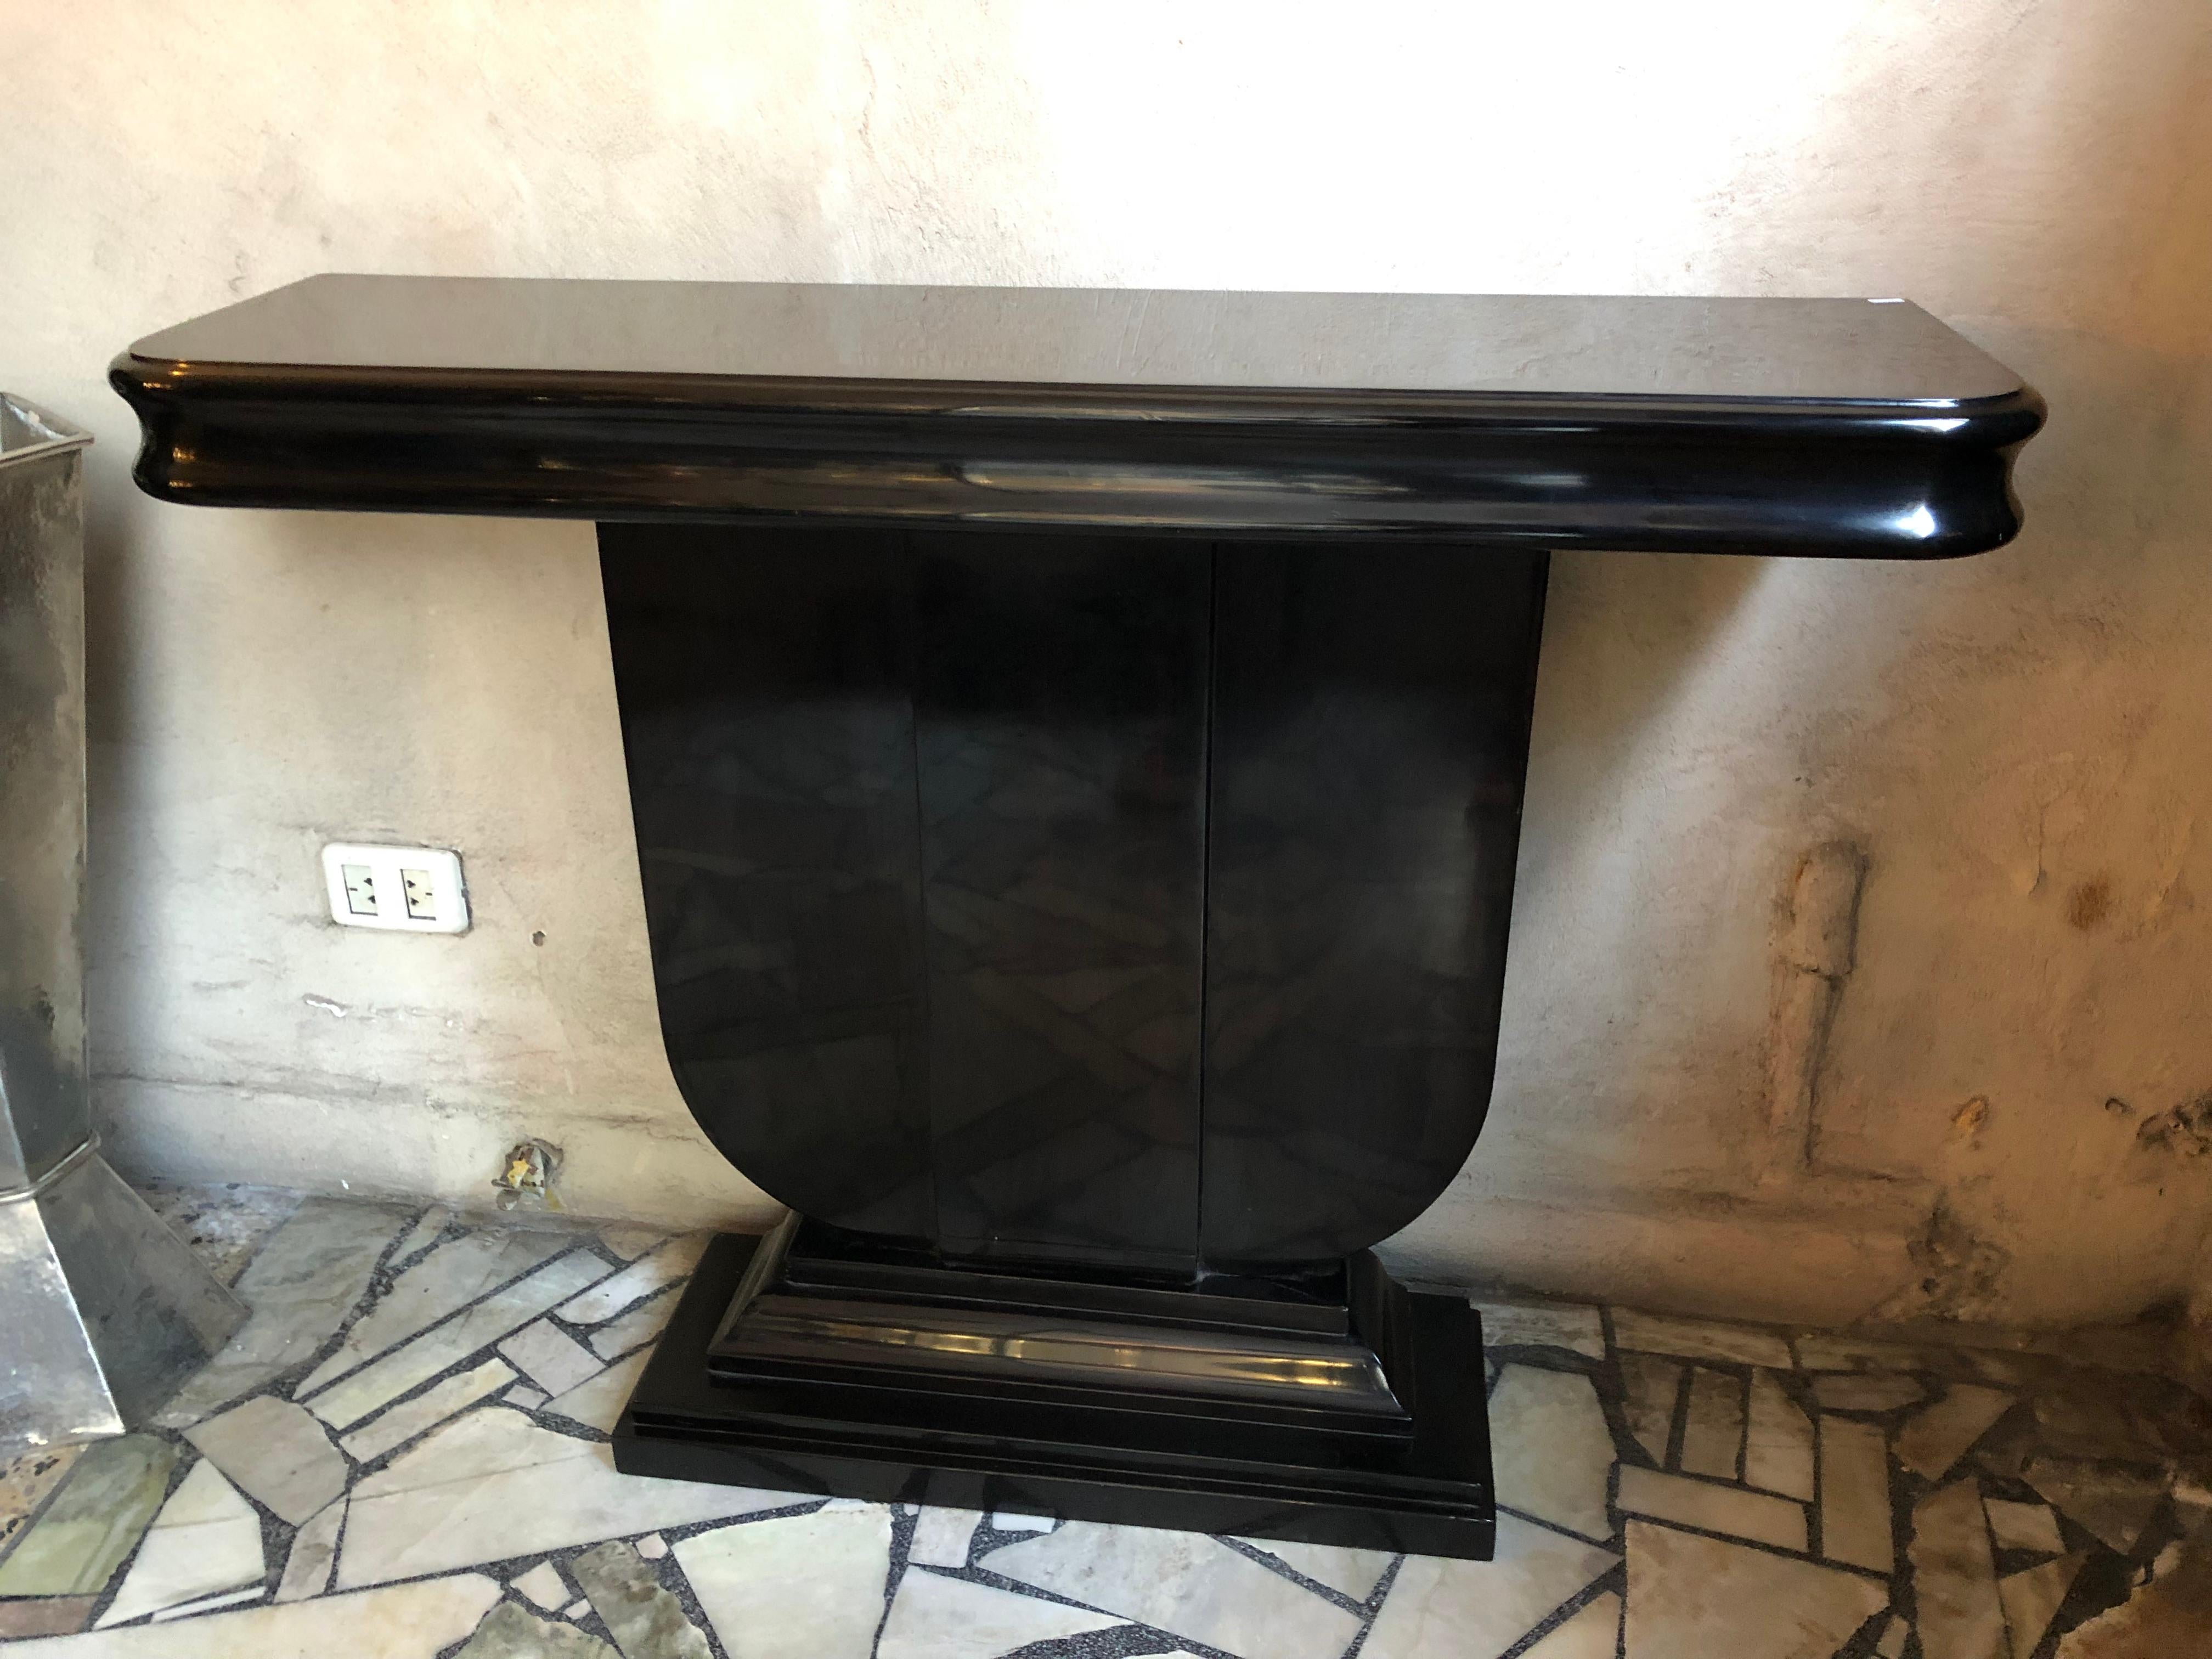 2 Consoles Art Deco
Year: 1930
Country: French
Wood
Finish: polyurethanic lacquer
It is an elegant and sophisticated console.
You want to live in the golden years, this is console that your project needs.
We have specialized in the sale of Art Deco